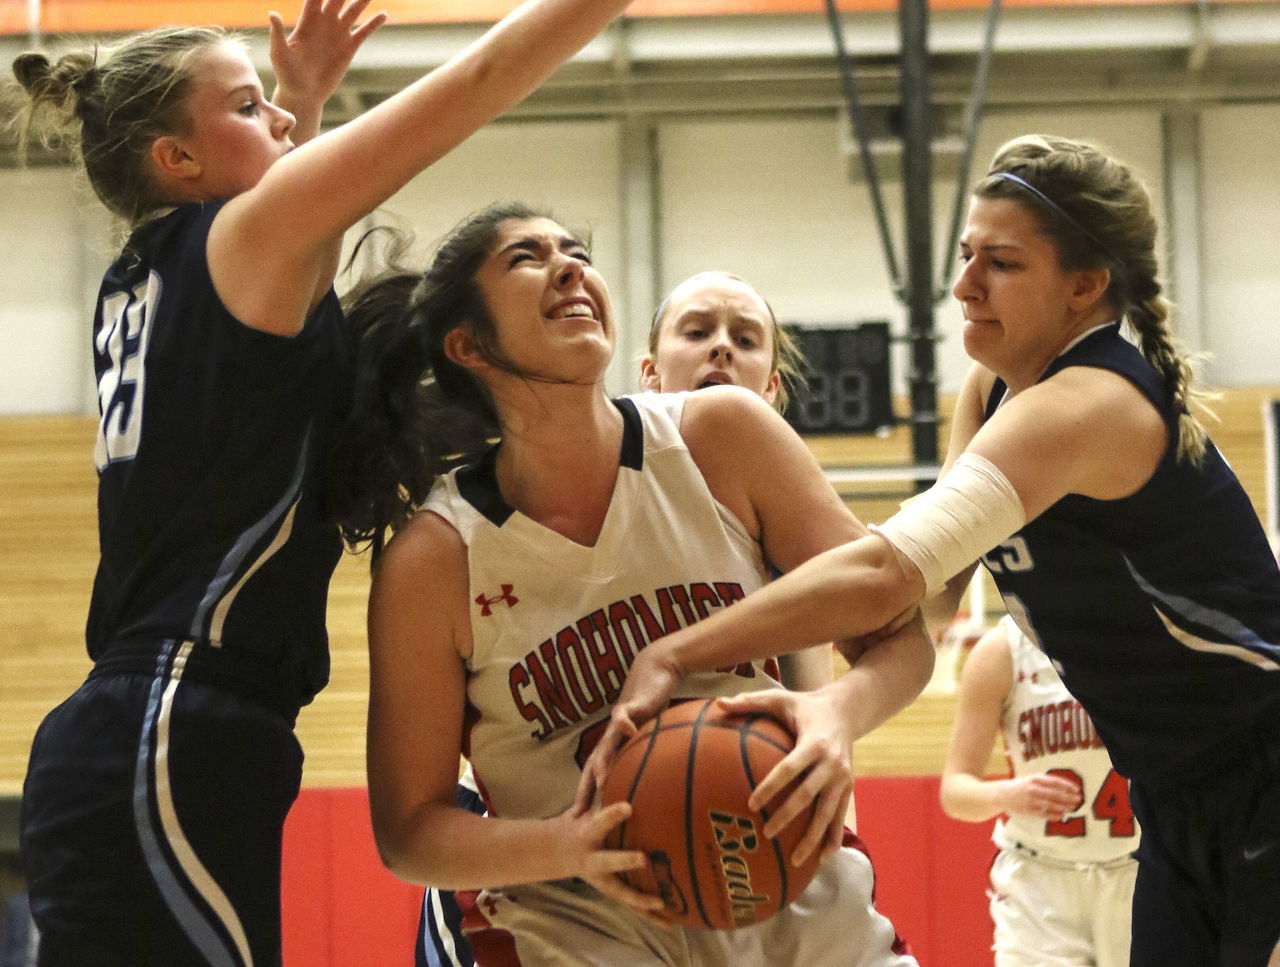 Snohomish’s Madeline Smith has led Snohomish in scoring and rebounding each of the past four seasons.